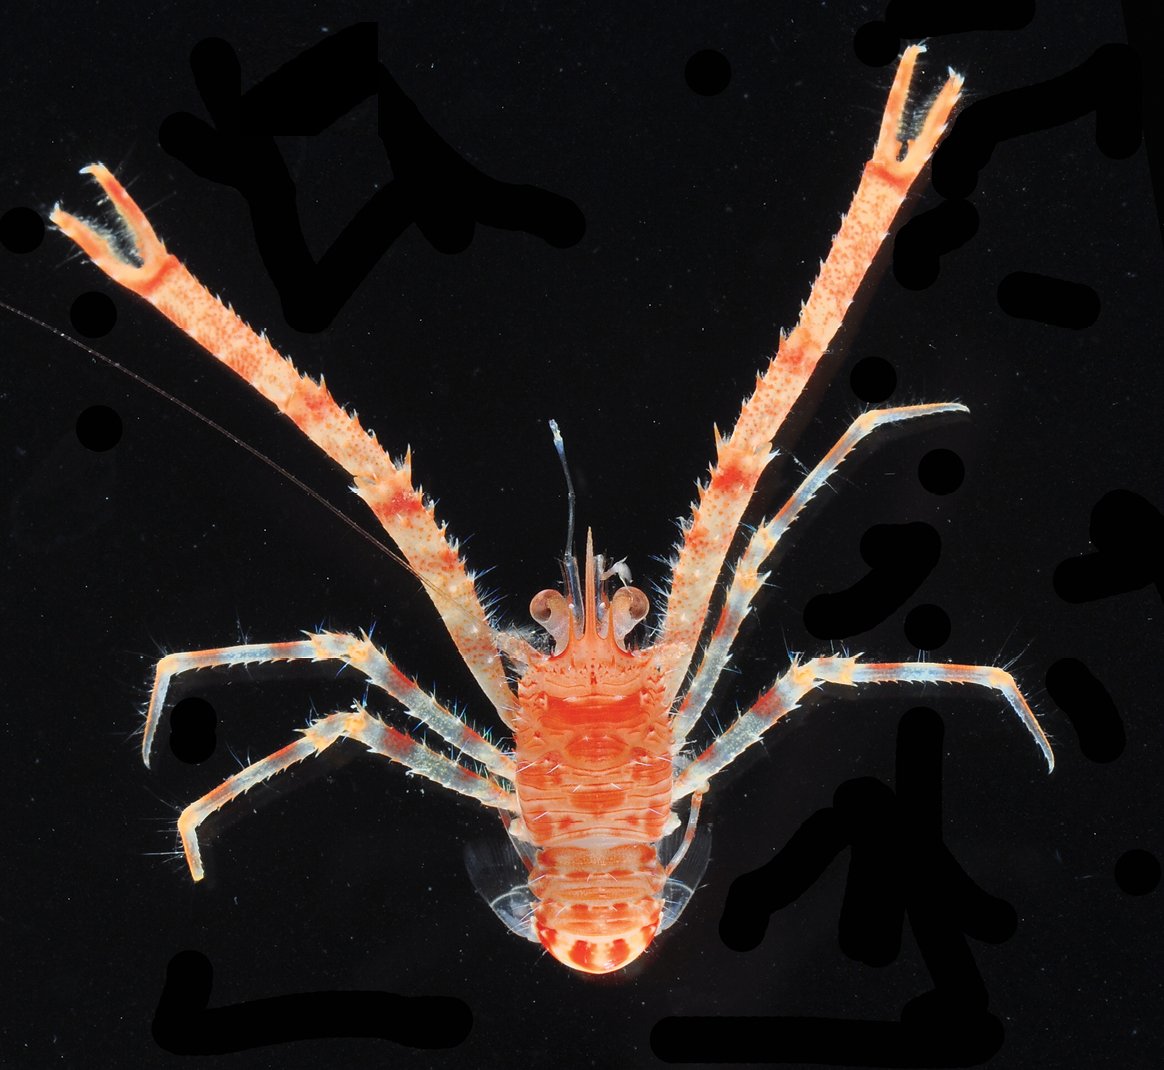 Seven #newspecies of squat #lobsters were described from the waters around New Caledonia and Papua New Guinea, Southwest Pacific. Read more about them here: doi.org/10.3897/zookey… #crustaceans #taxonomy #marinelife